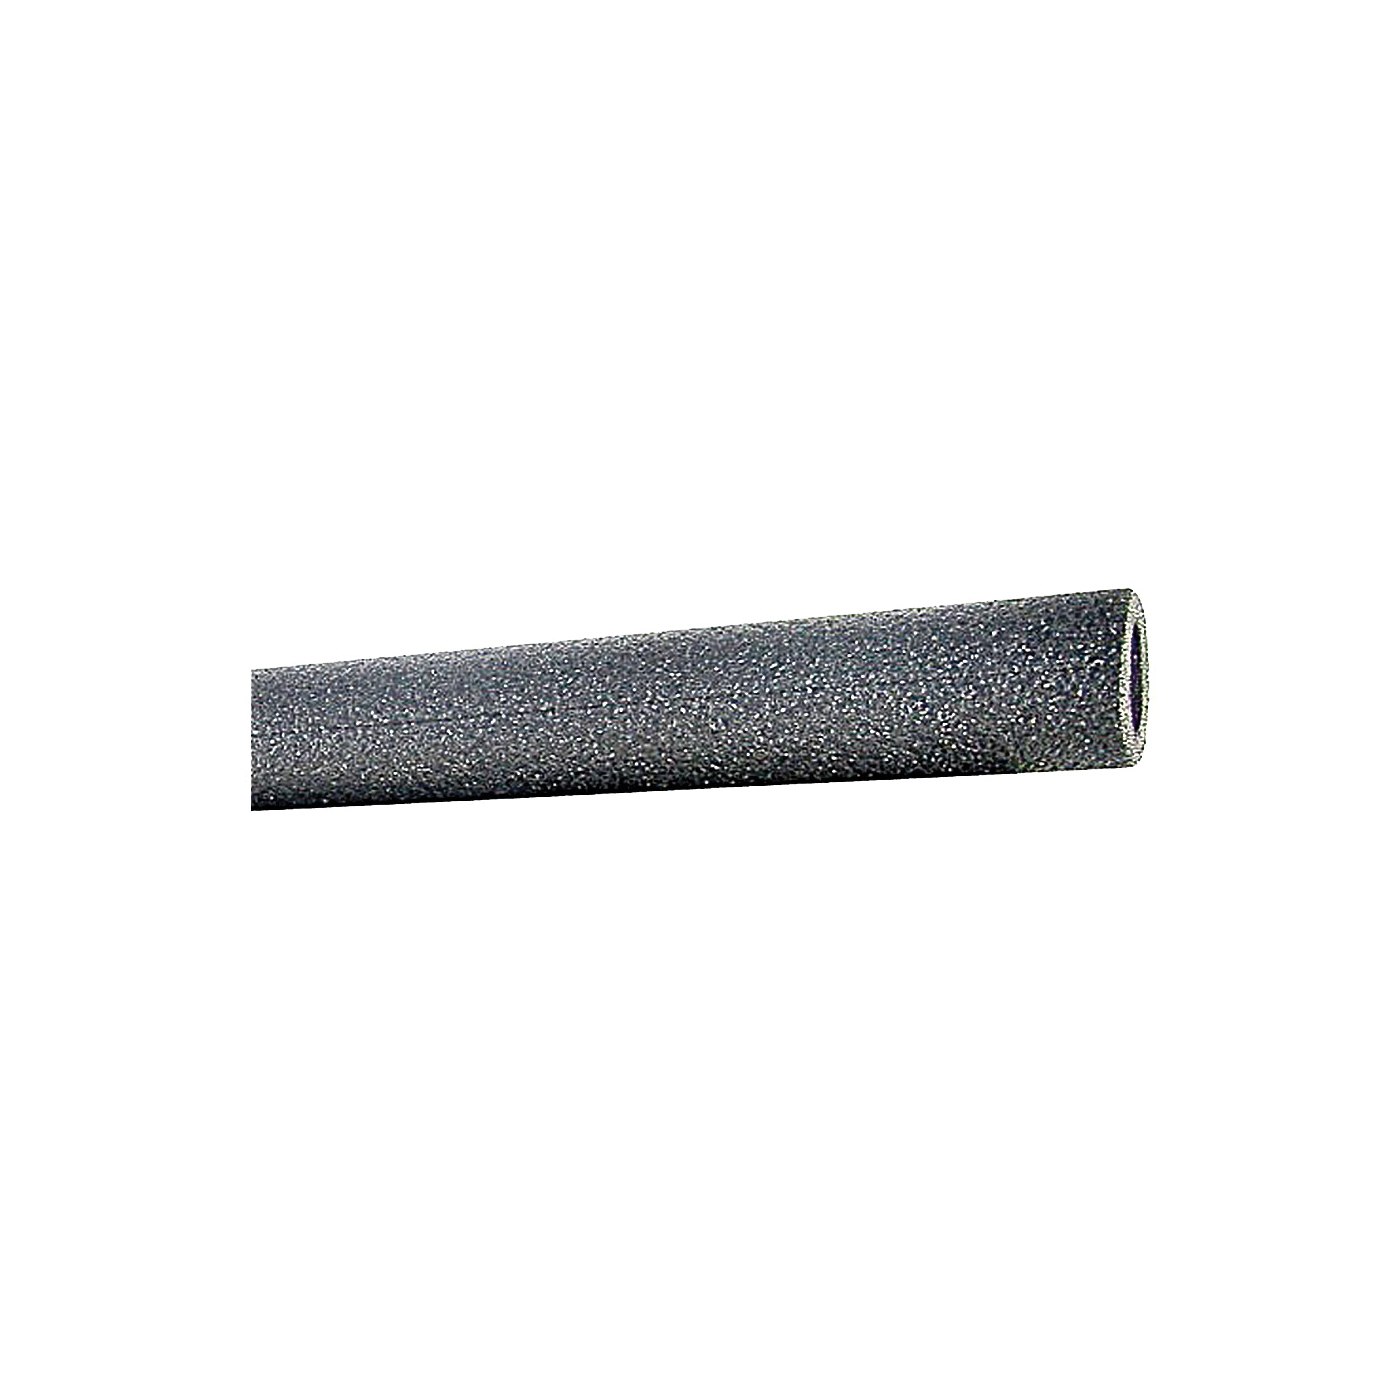 PR12138TW Pipe Insulation, 6 ft L, Polyolefin, Charcoal, 1-1/4 in Pipe